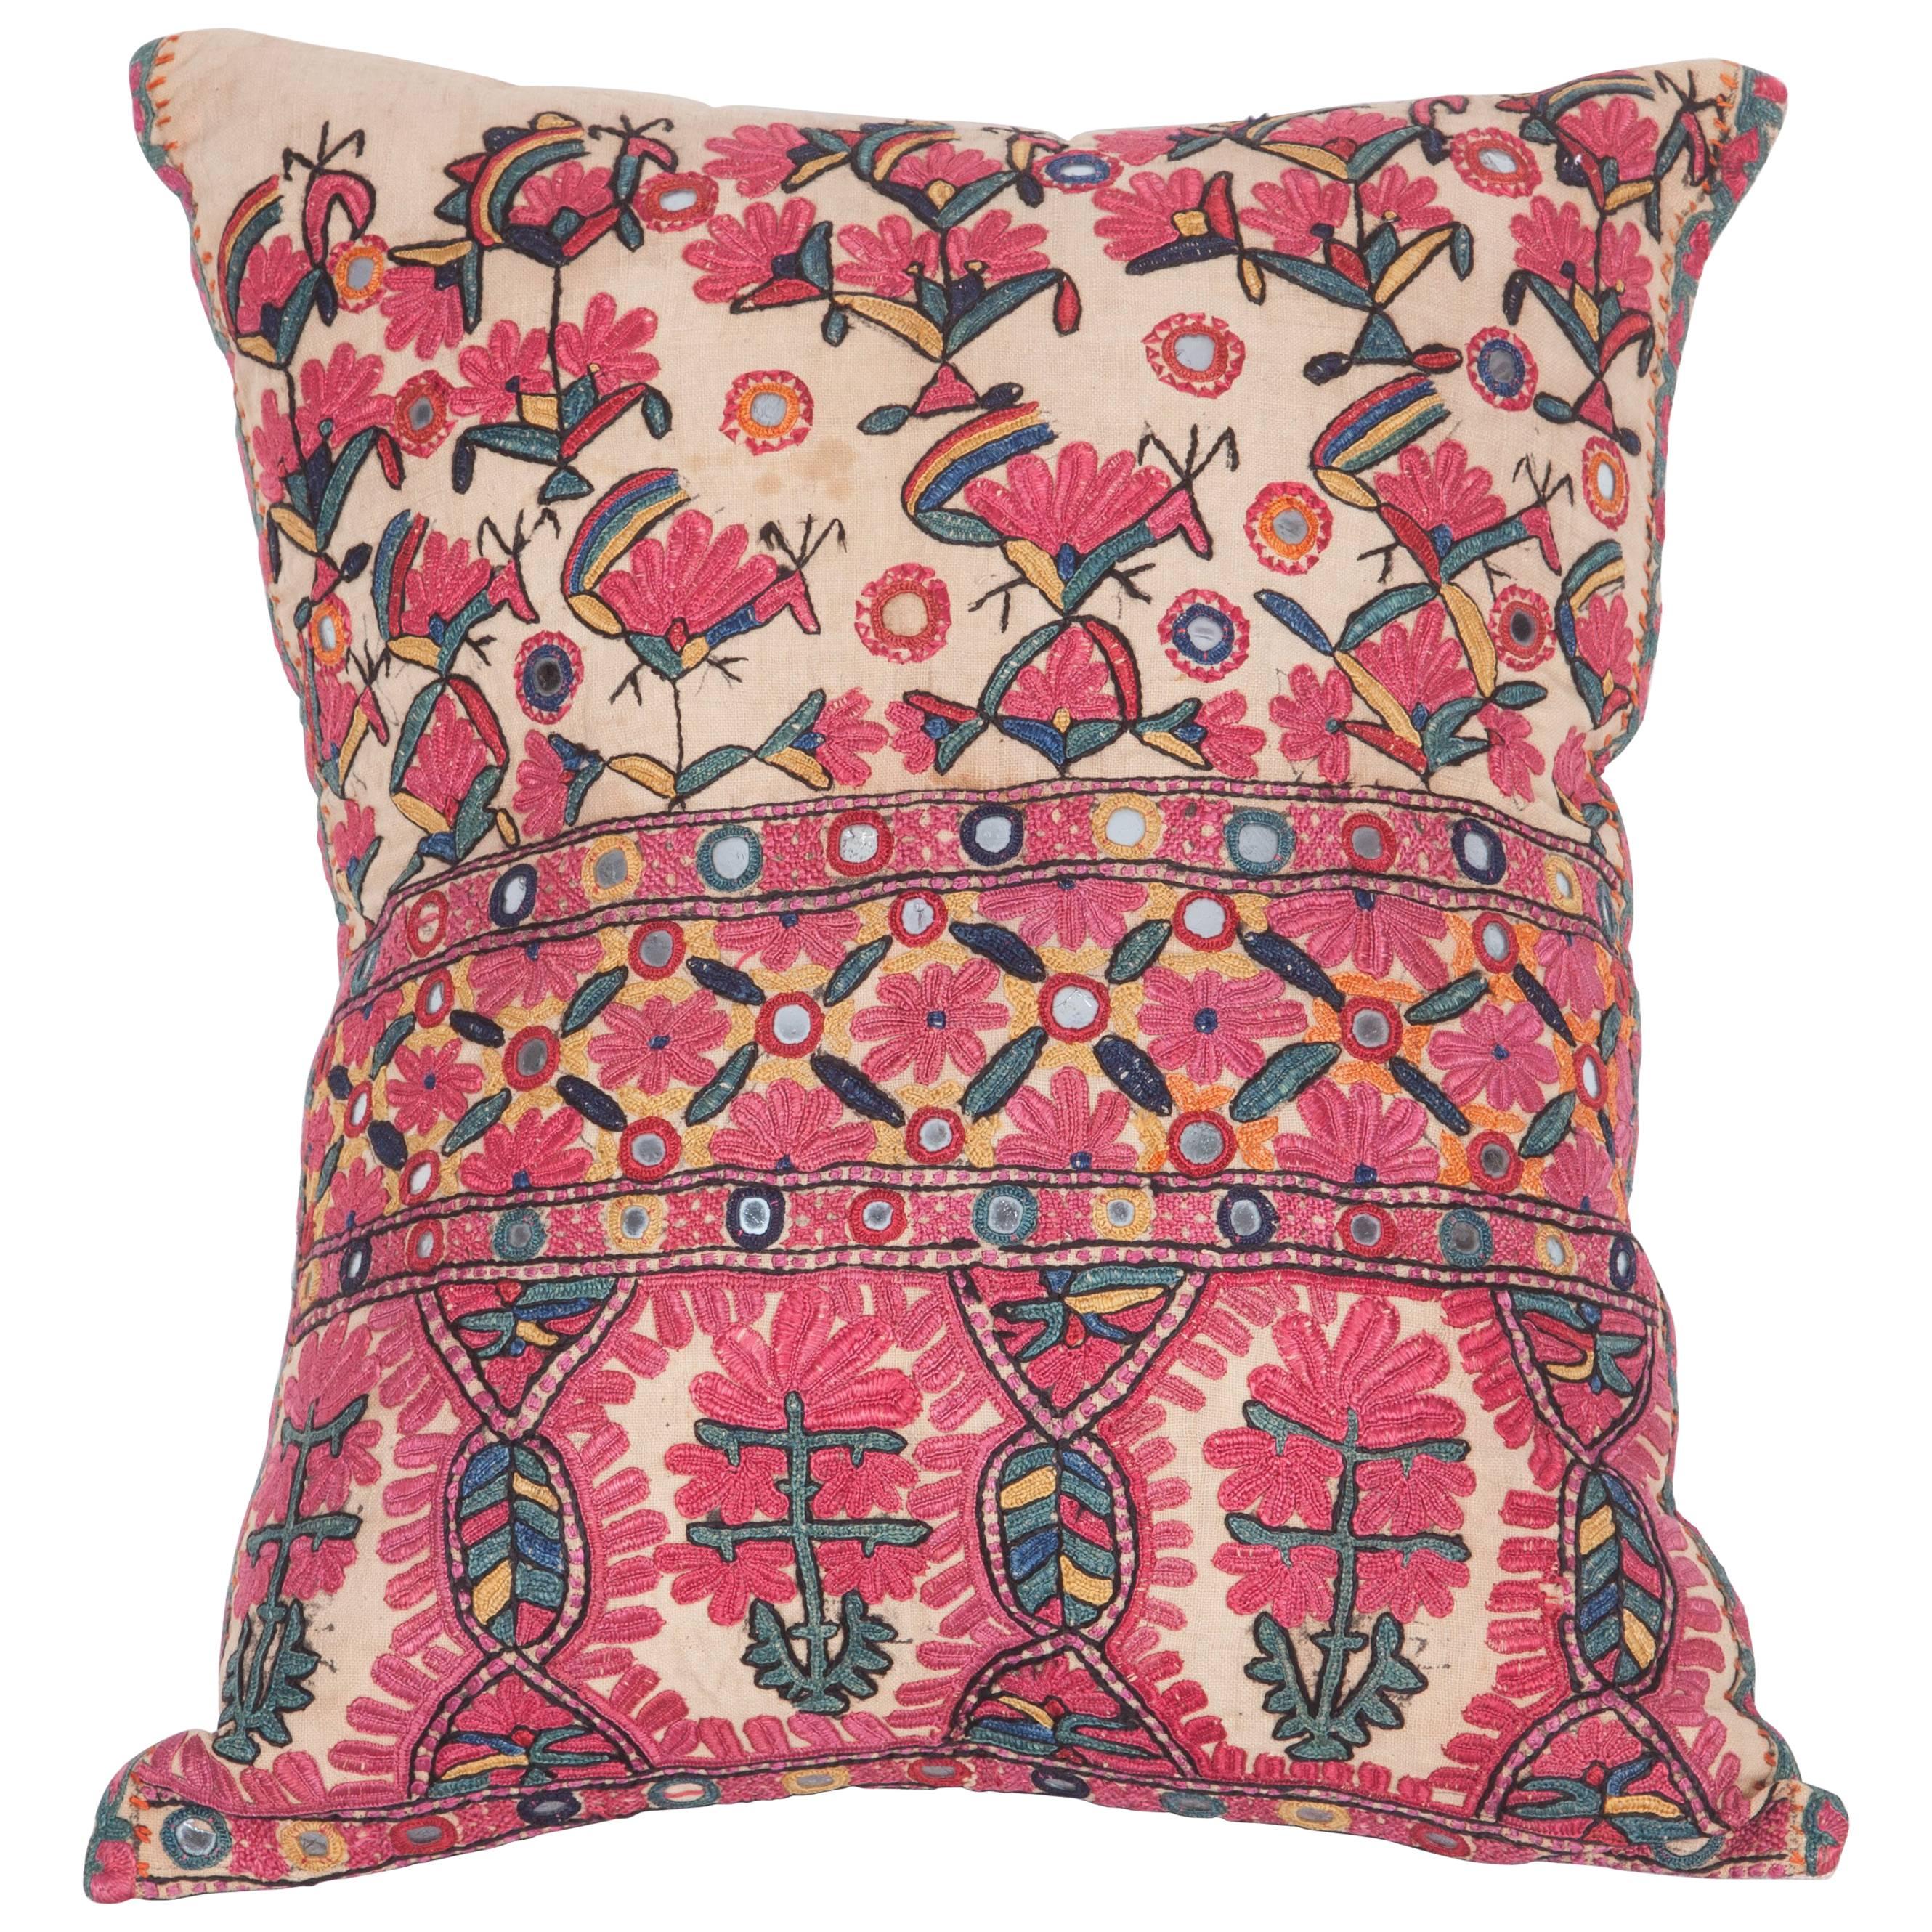 Antique Pillow Made Out of a Late 19th Century Sind Embroidery